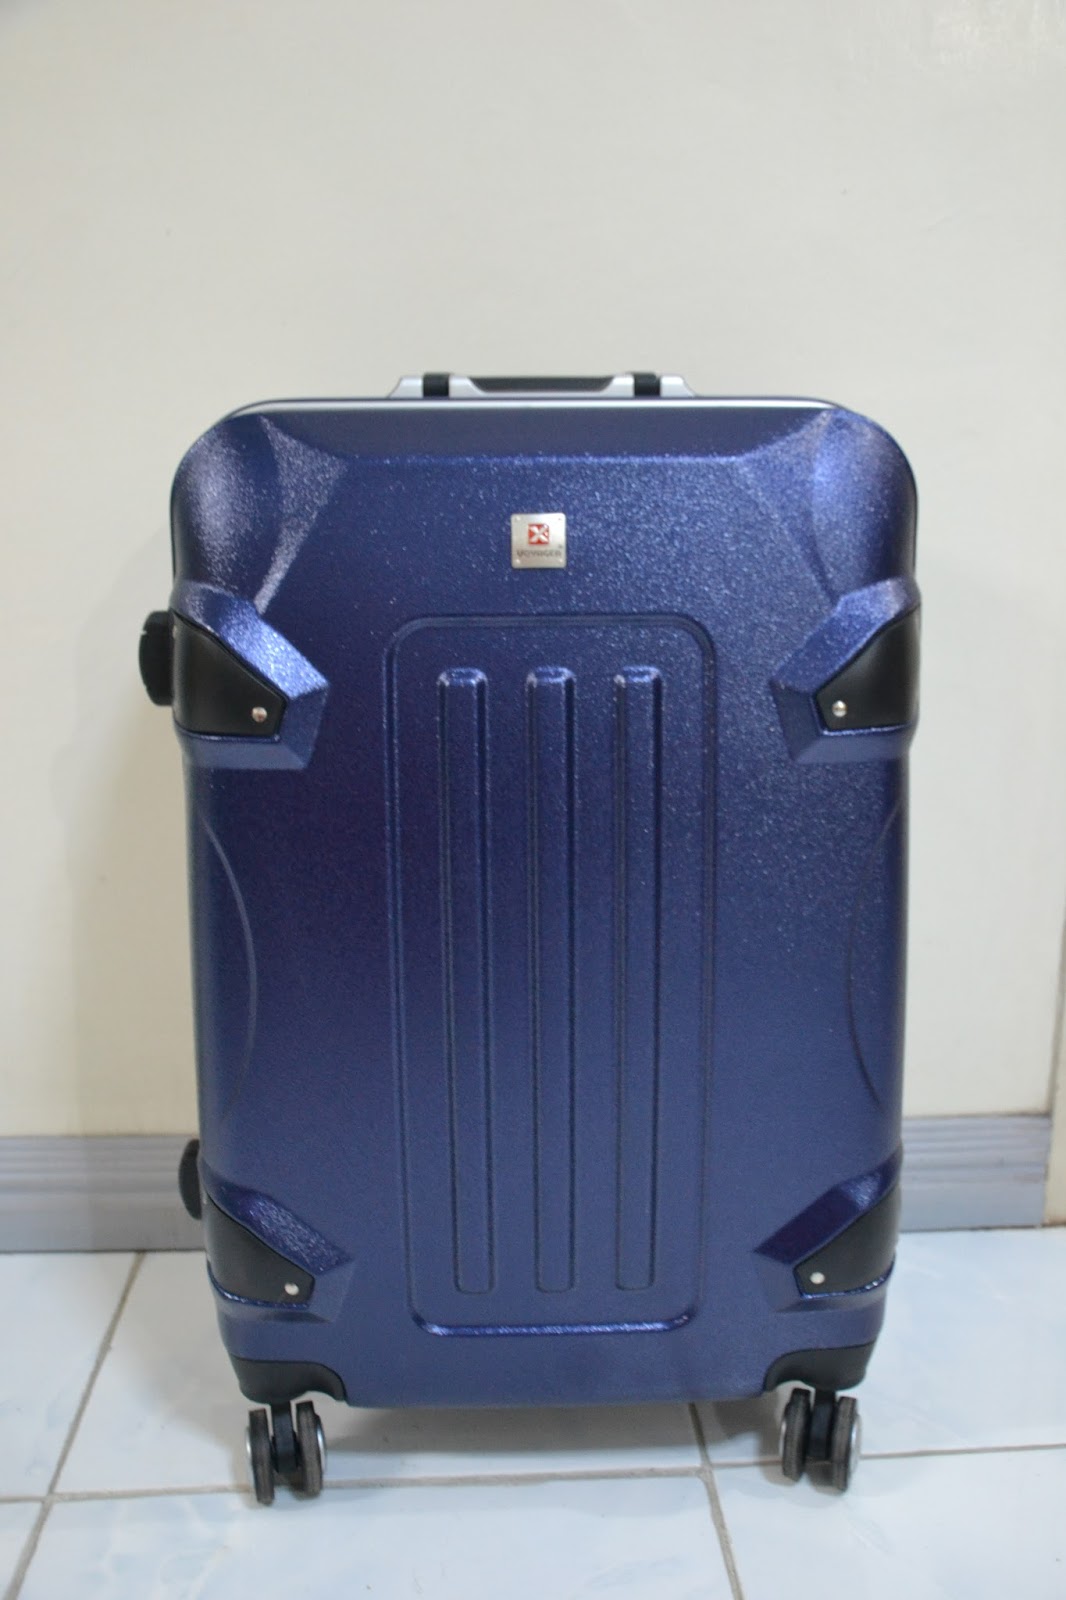 voyager luggage philippines website